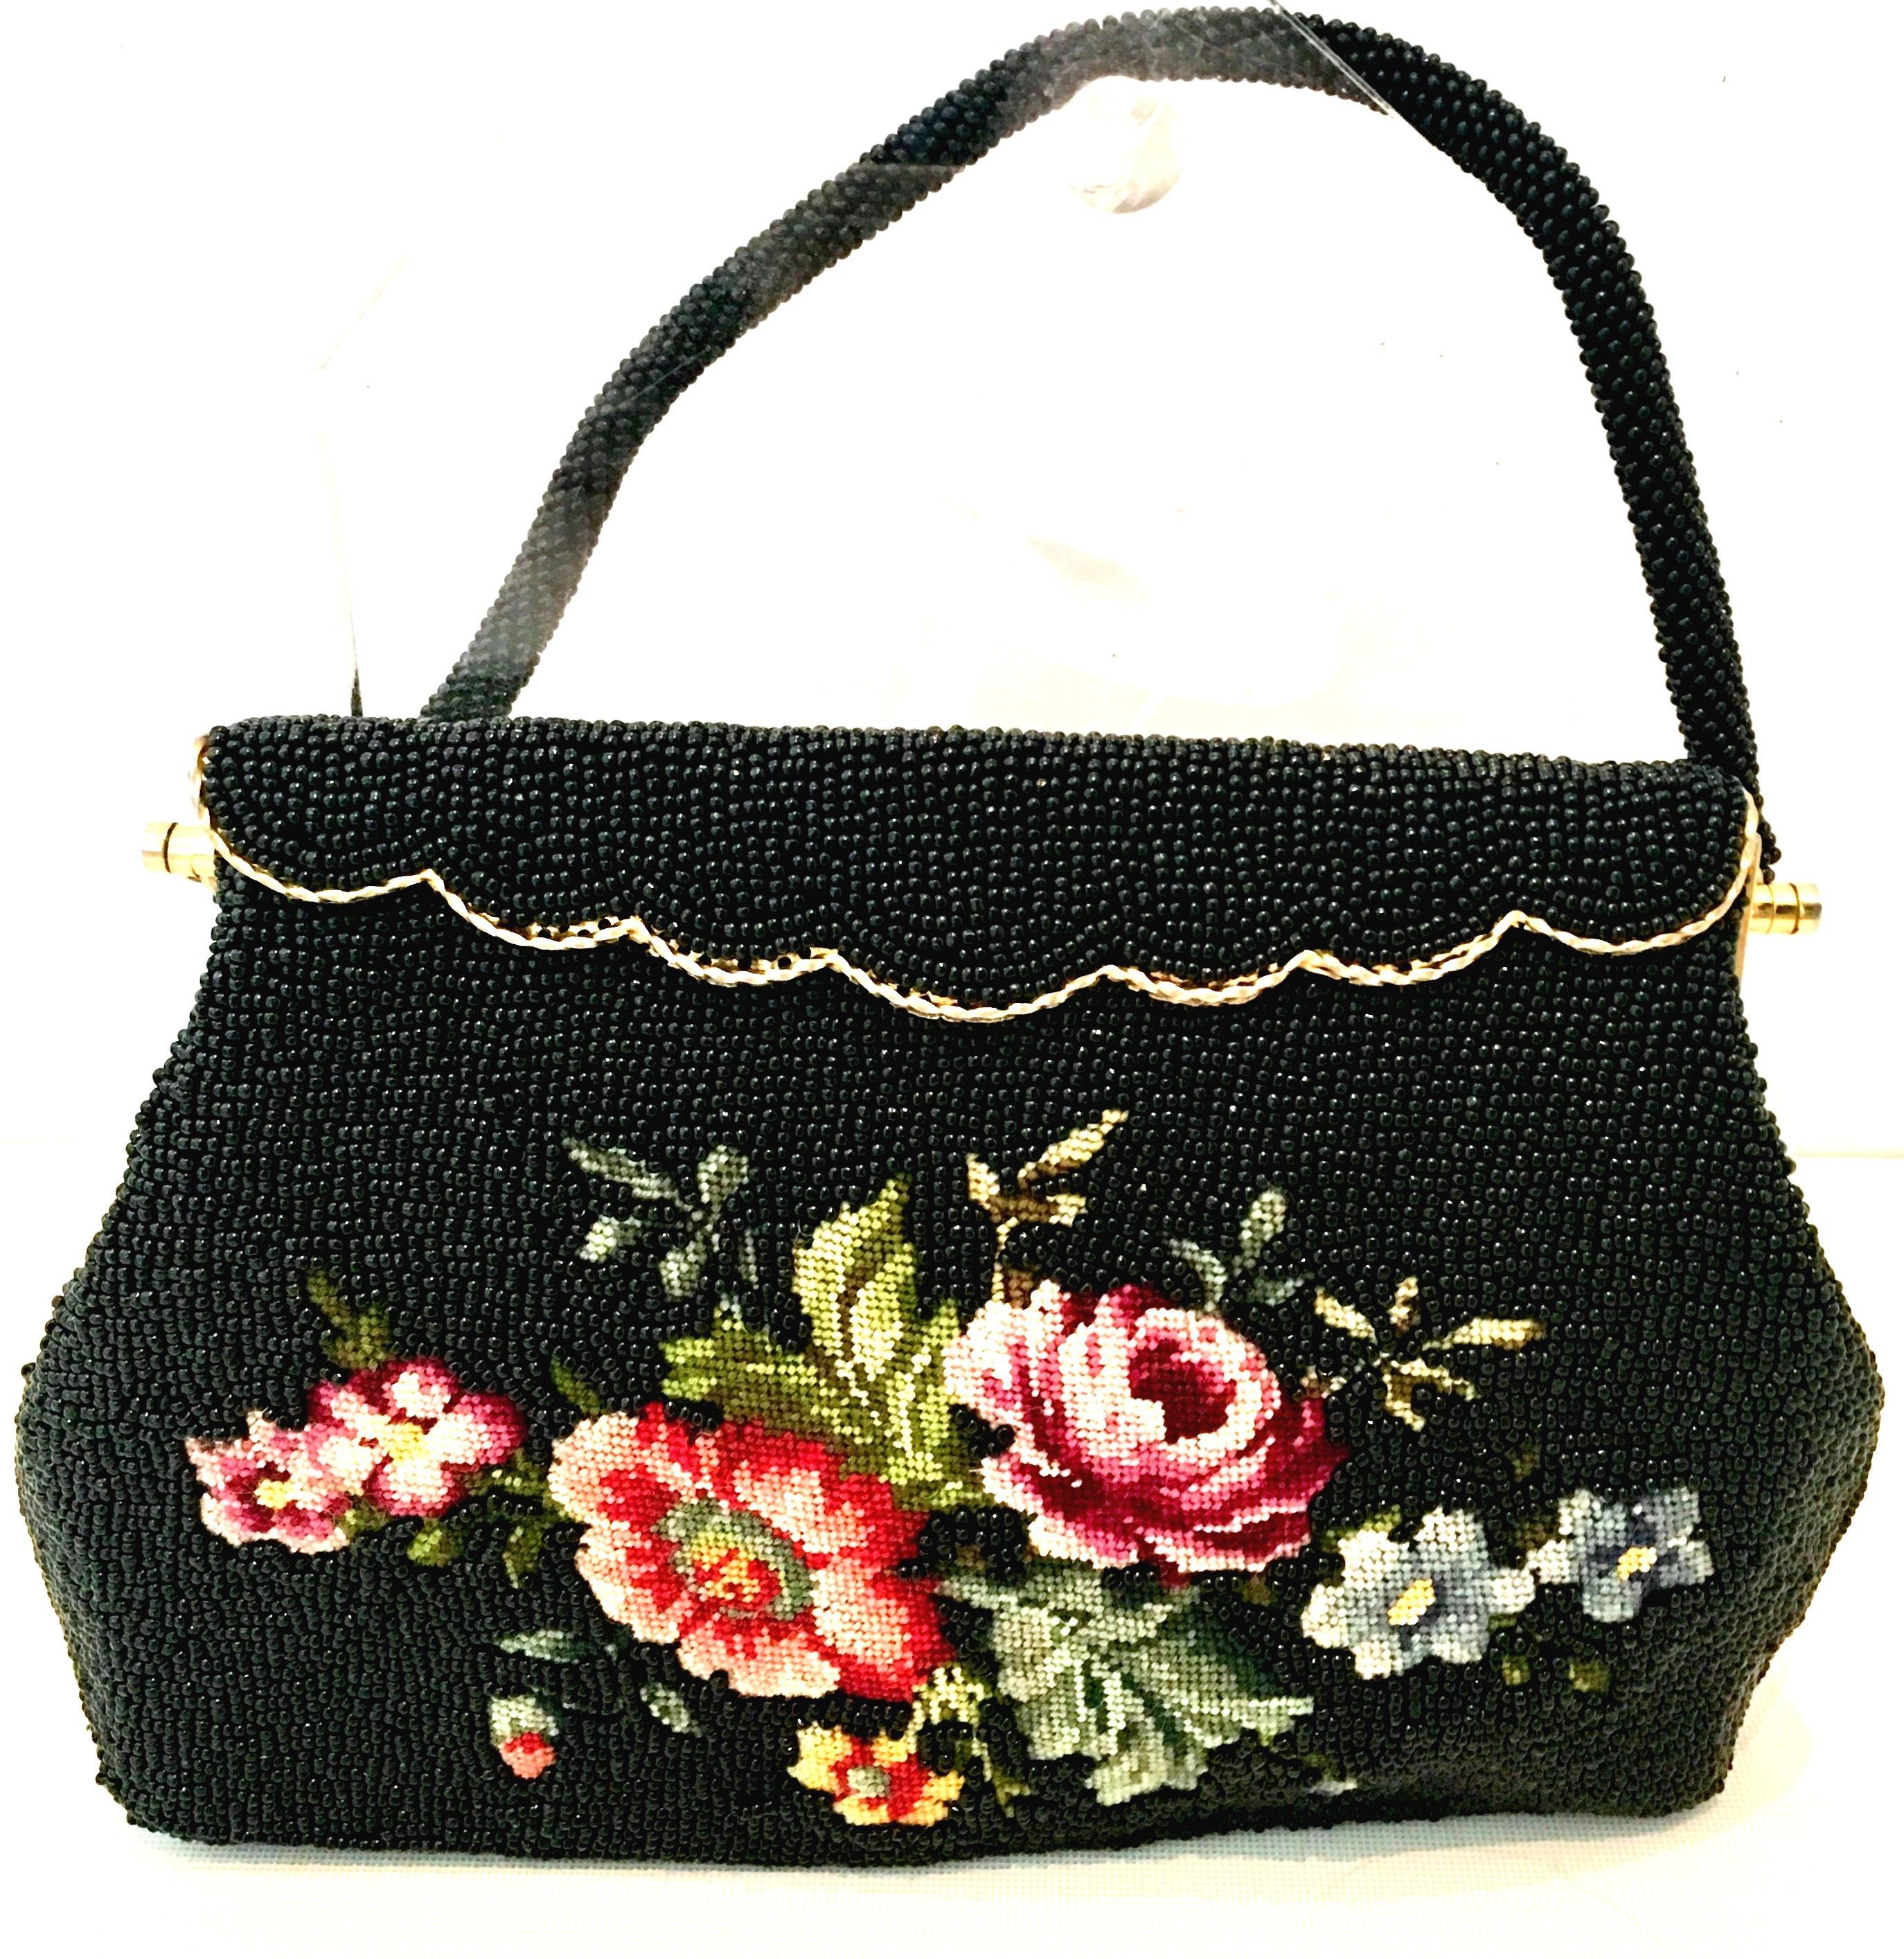 1950'S Hand Beaded & Crewel Embroidered Hong Kong Evening Bag. This pristine and unique piece is executed with jet black art glass beads, and and a crewel embroidered central floral motif. The rope style handle strap is also made of jet black art